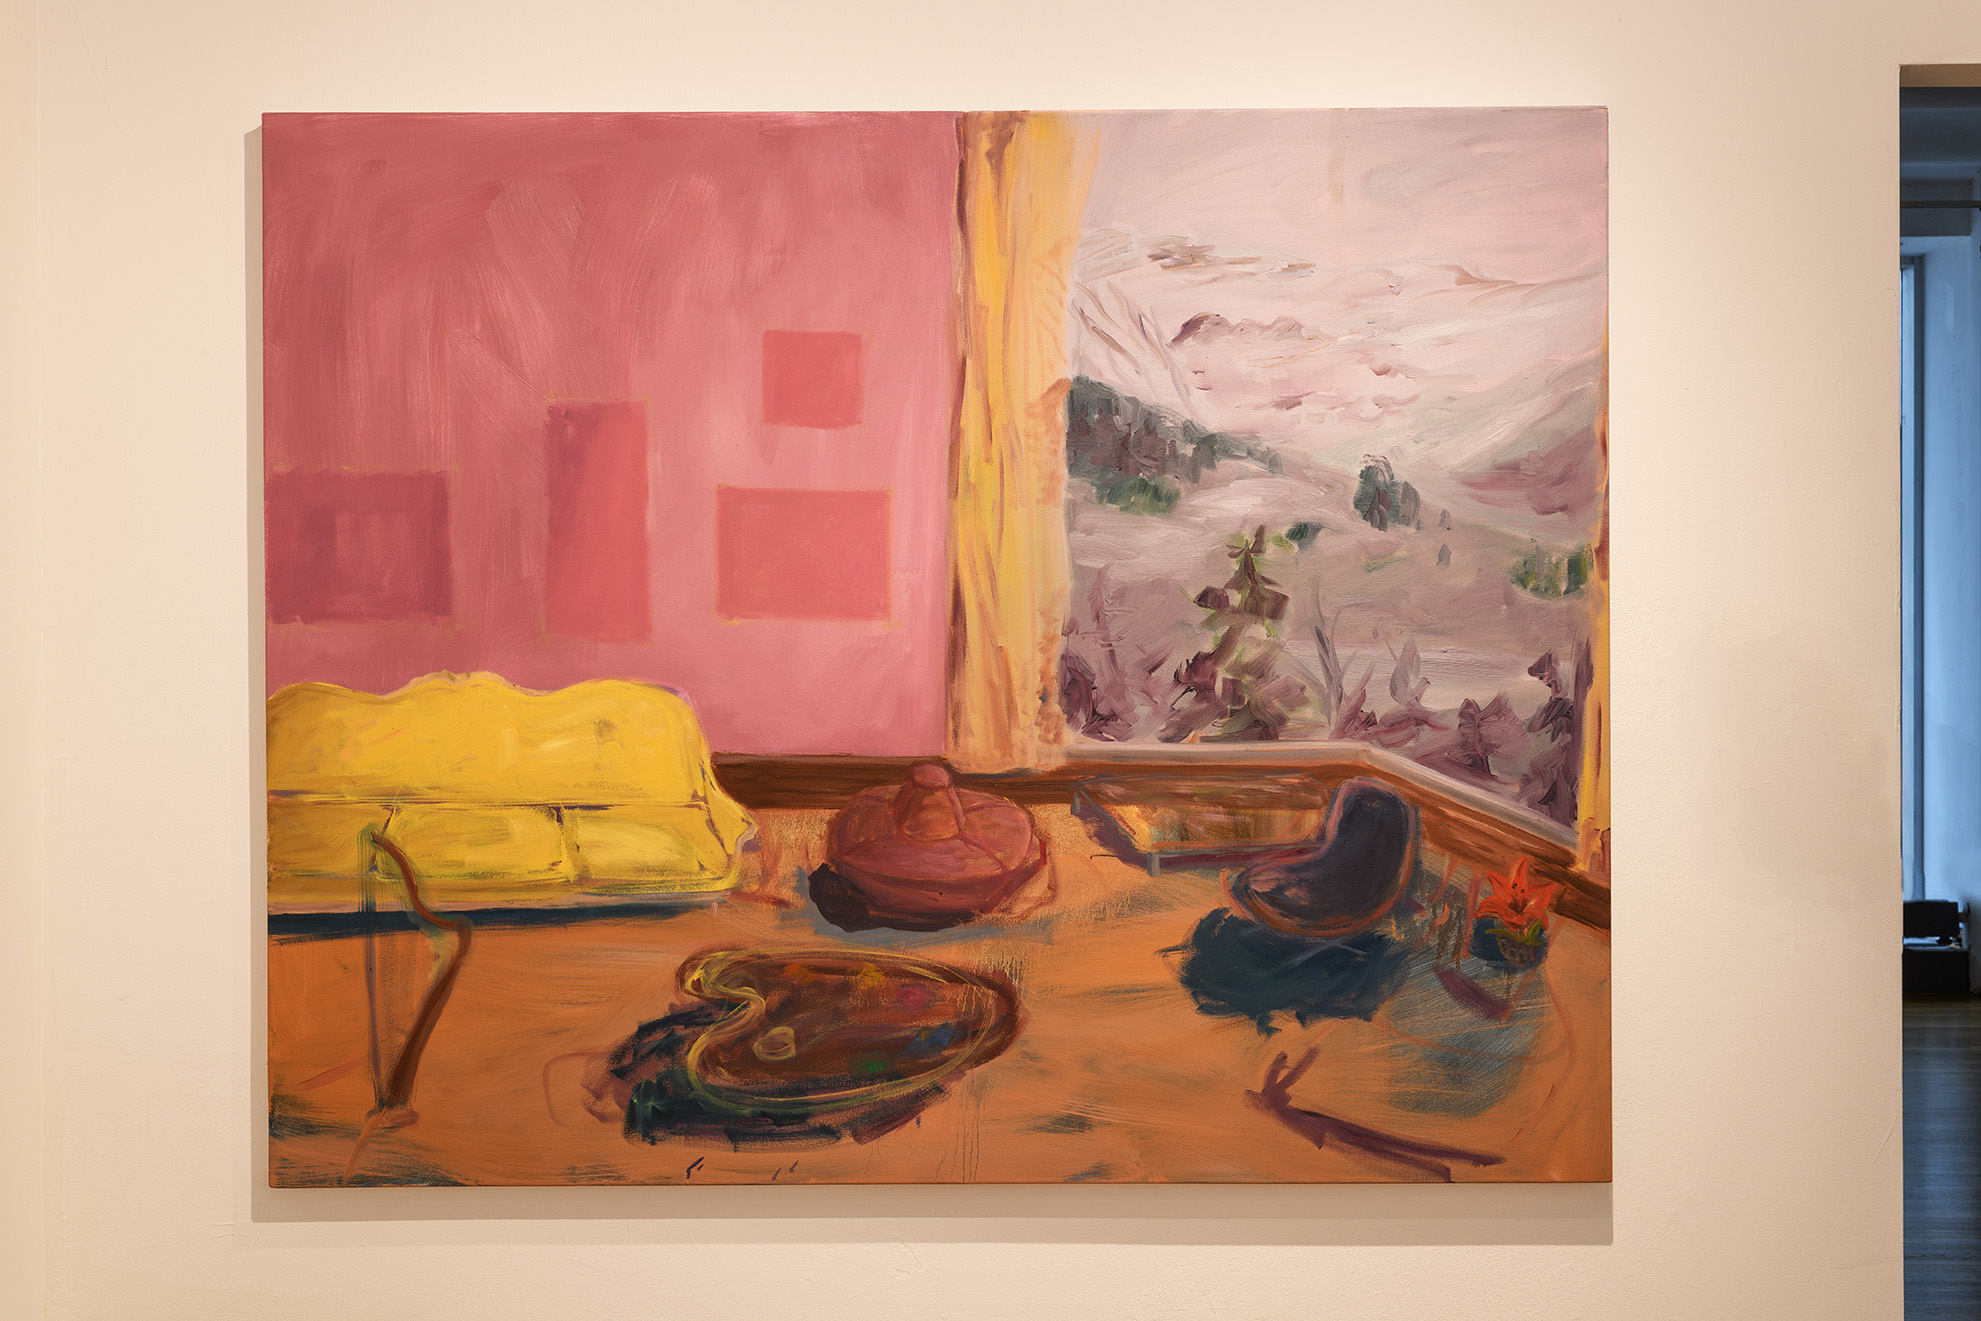 [A very colorful painting of an interior featuring pink walls, orange floors, two couches, a chair, a table, and a harp. The room’s wall seems to be sun-bleached—dark pink rectangles imply spaces where pictures or paintings may have once hung. There also appears to be a large window looking out onto an abstract purple landscape.]